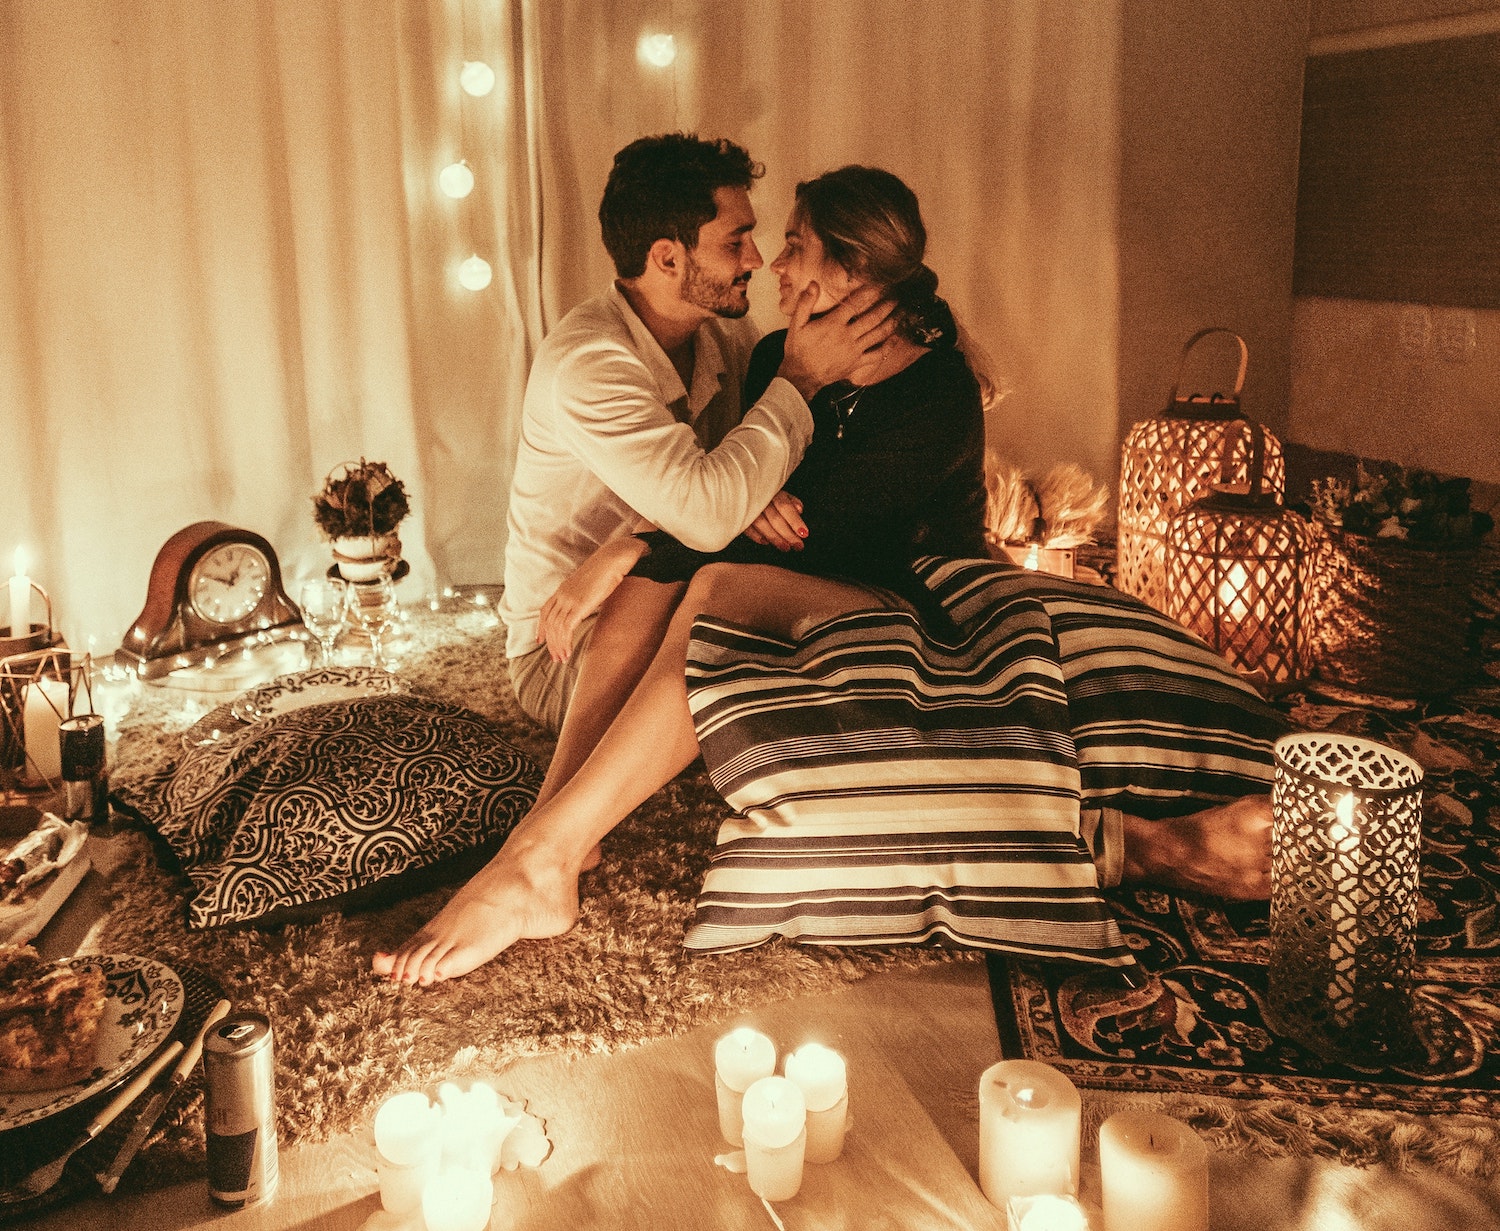 couple about to kiss, in love, tantric ritual, candles, romantic